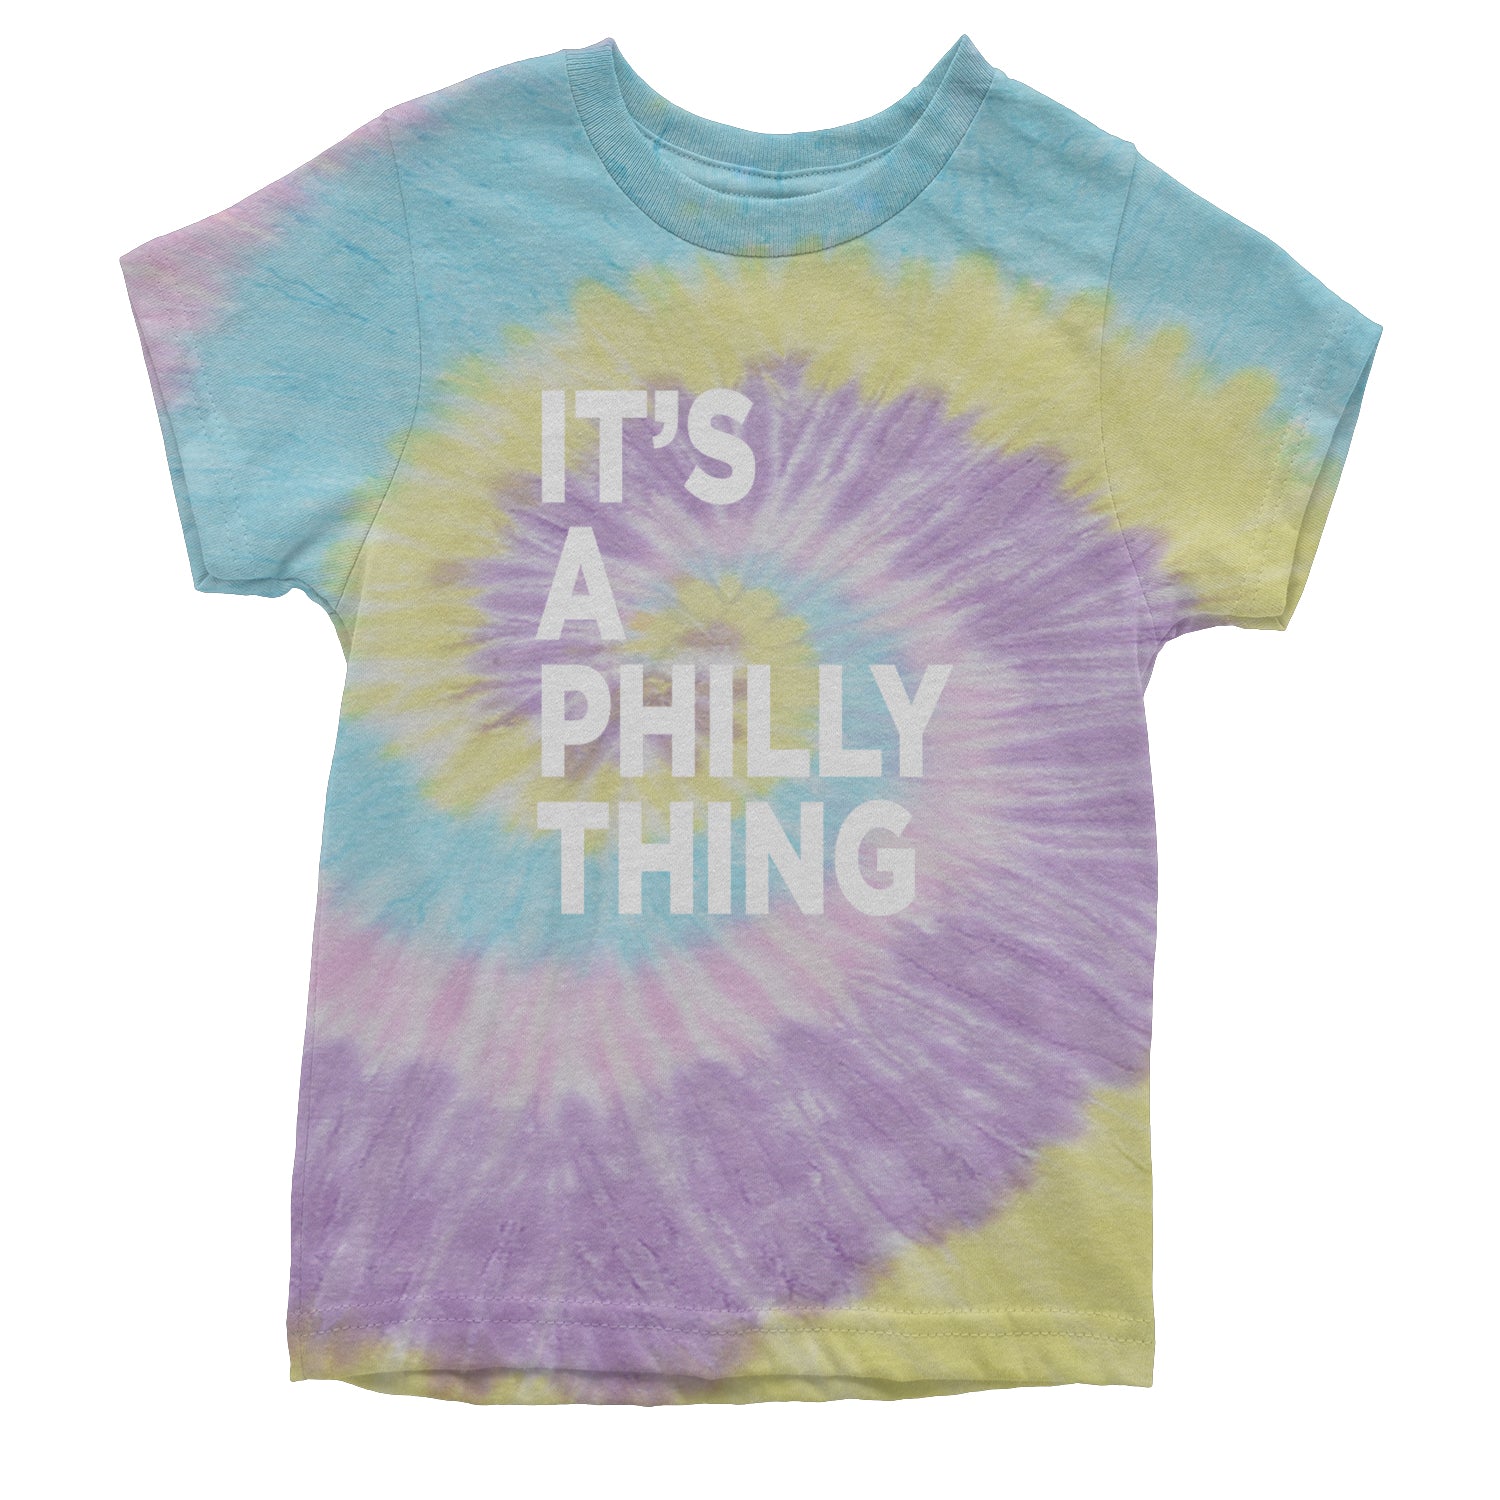 PHILLY It's A Philly Thing Youth T-shirt baseball, dilly, filly, football, jawn, morgan, Philadelphia, philli by Expression Tees